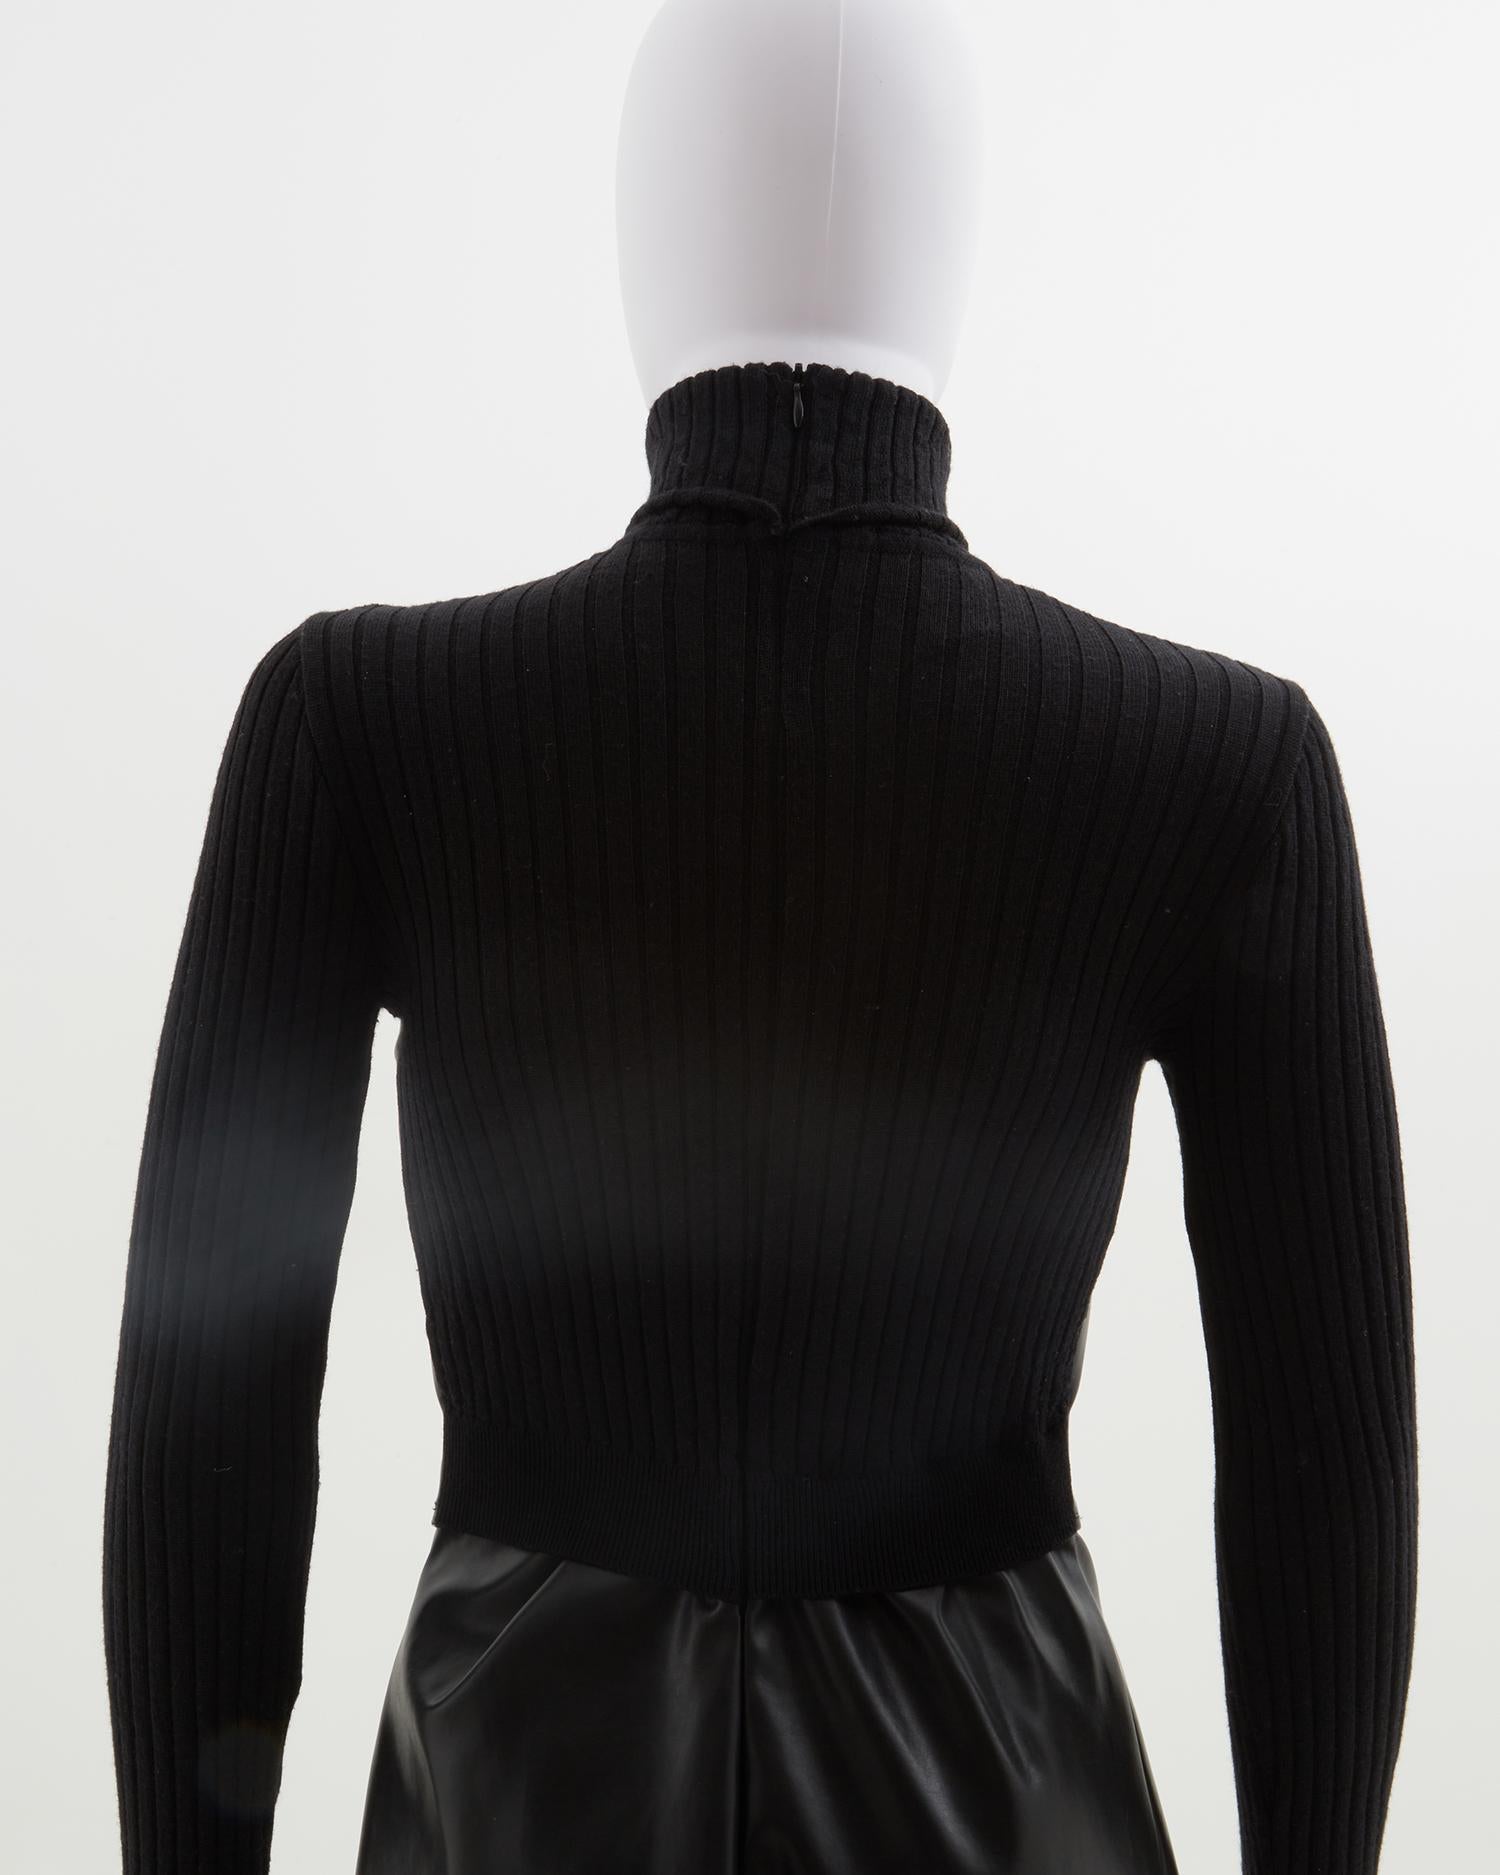 Jean Paul Gaultier black vegan leather & ribbed knit high-neck wool dress, ealry For Sale 2